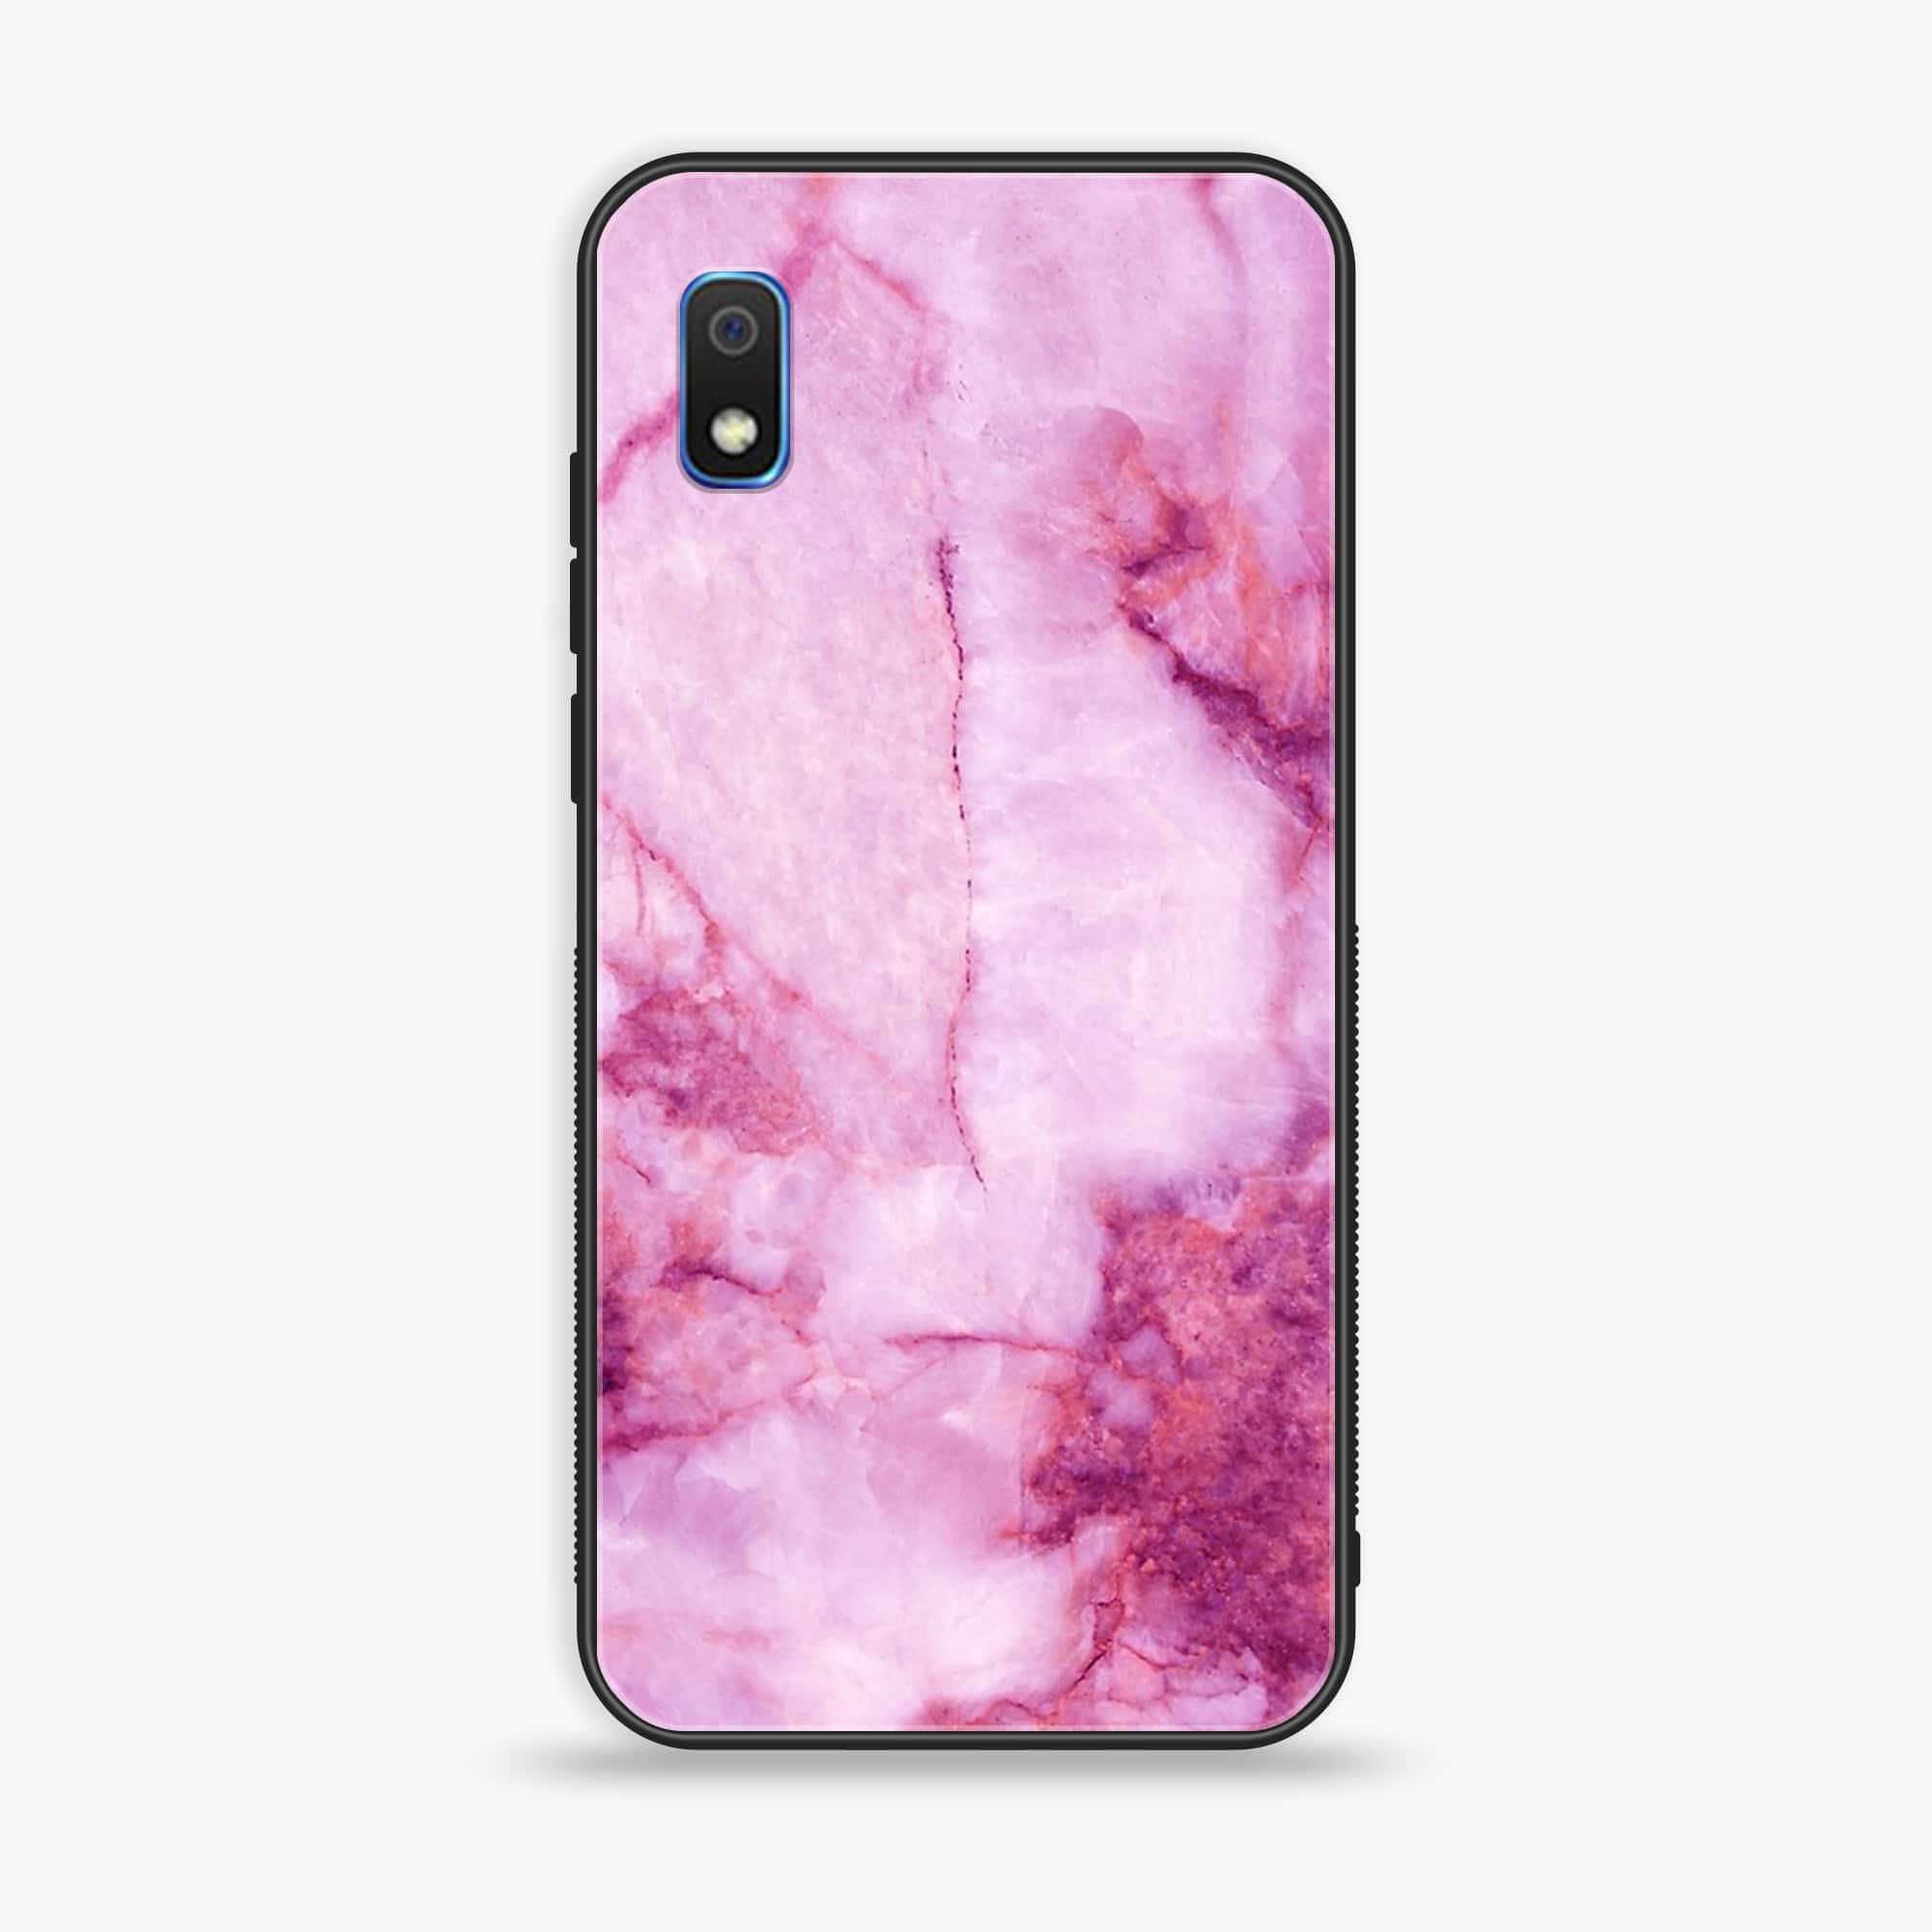 Samsung Galaxy A10 - Pink Marble Series - Premium Printed Glass soft Bumper shock Proof Case